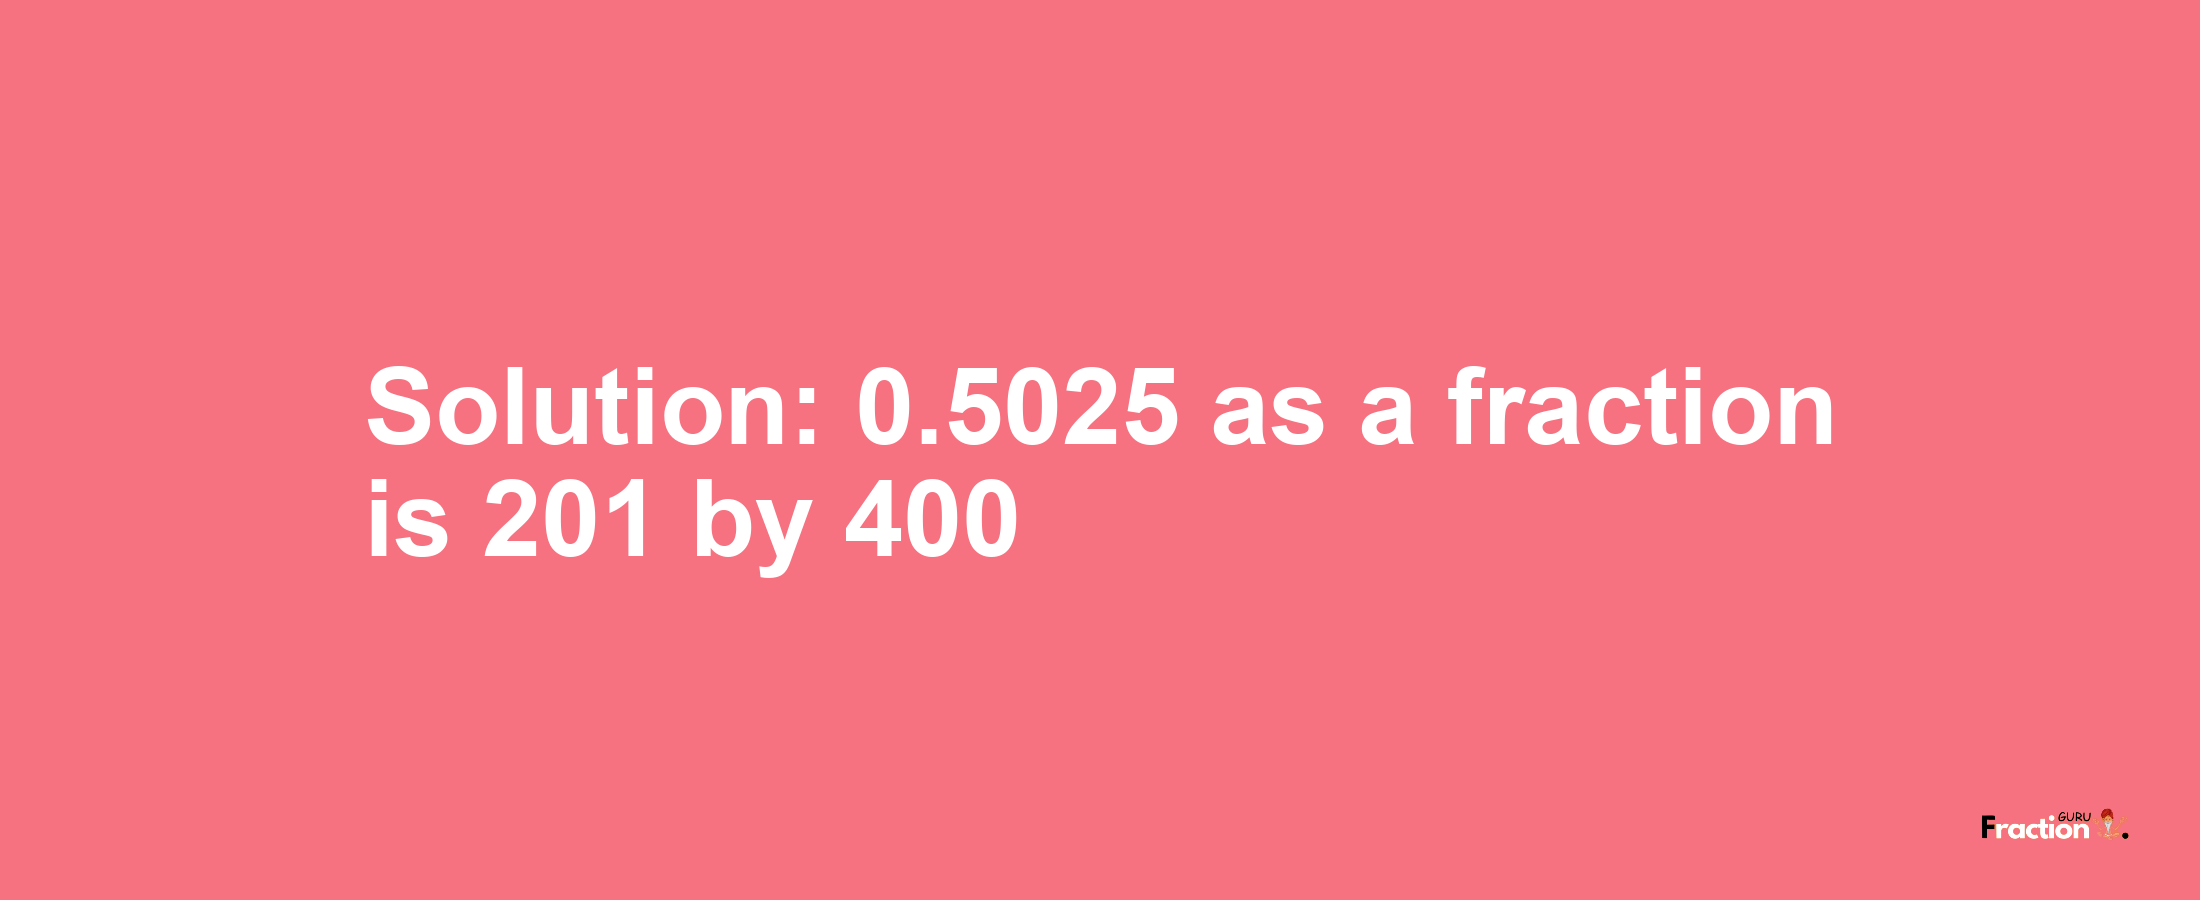 Solution:0.5025 as a fraction is 201/400